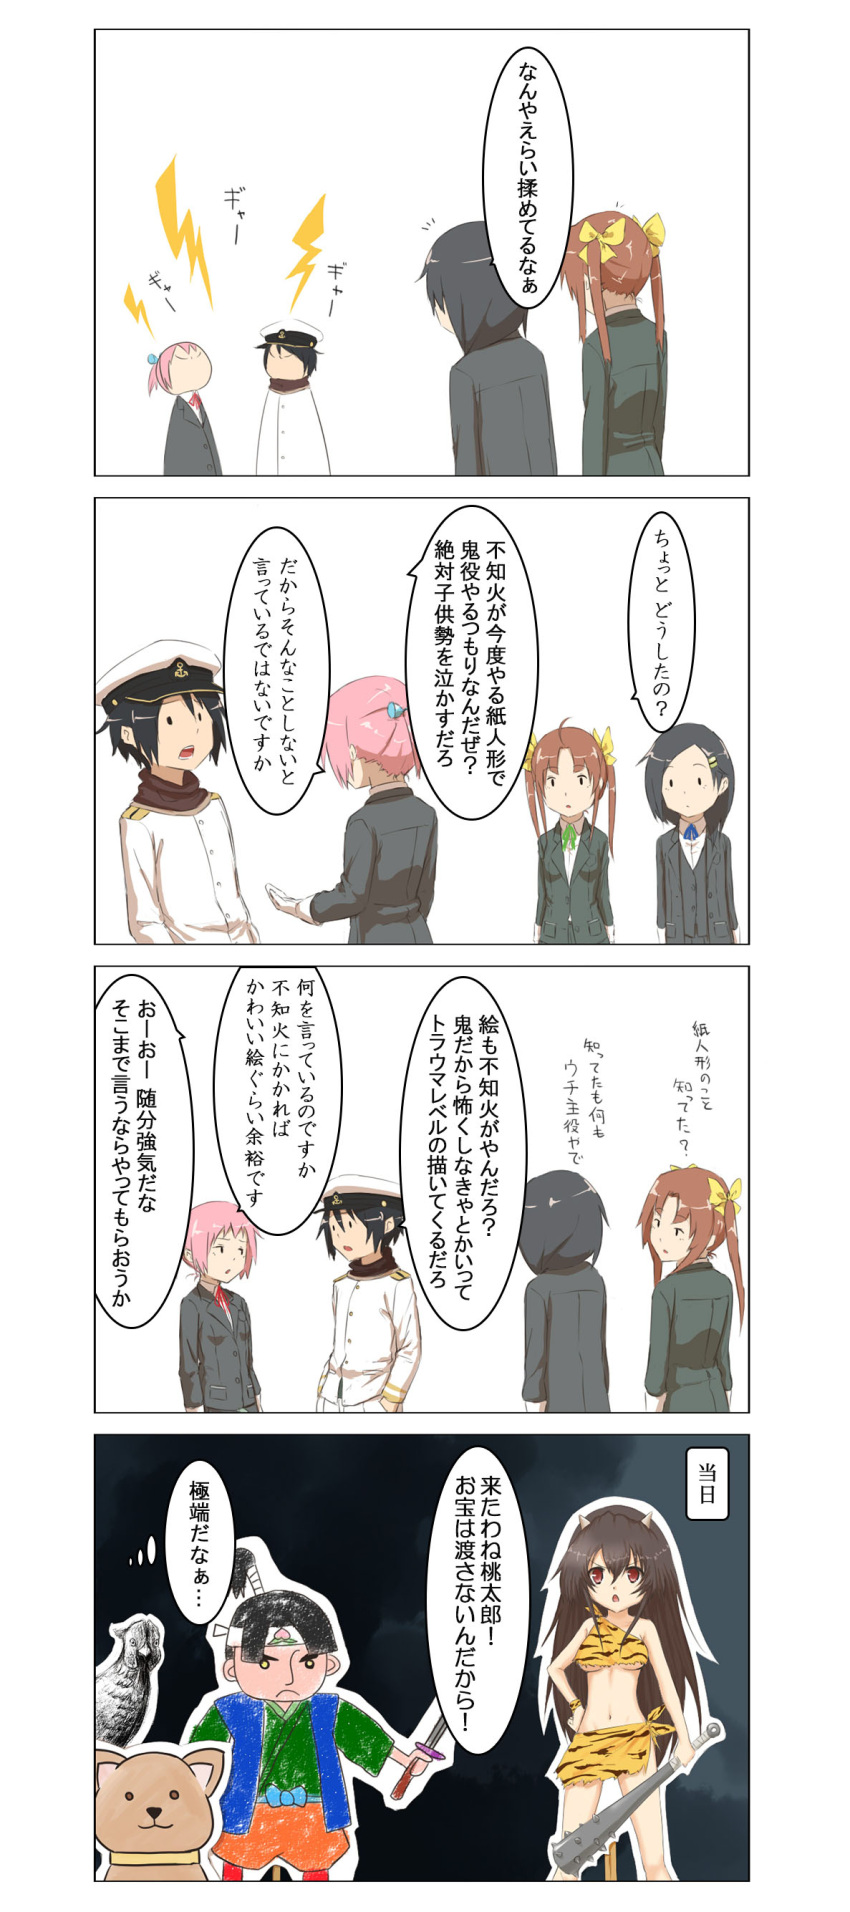 ... 1boy 3girls 4koma absurdres admiral_(kantai_collection) black_hair brown_hair comic commentary_request dog formal furuhara hair_ribbon hat headband highres horns japanese_clothes kagerou_(kantai_collection) kantai_collection katana kuroshio_(kantai_collection) long_sleeves military military_hat military_uniform multiple_girls neck_ribbon pink_hair ponytail ribbon shiranui_(kantai_collection) short_hair speech_bubble spoken_ellipsis sword thought_bubble translation_request twintails uniform weapon